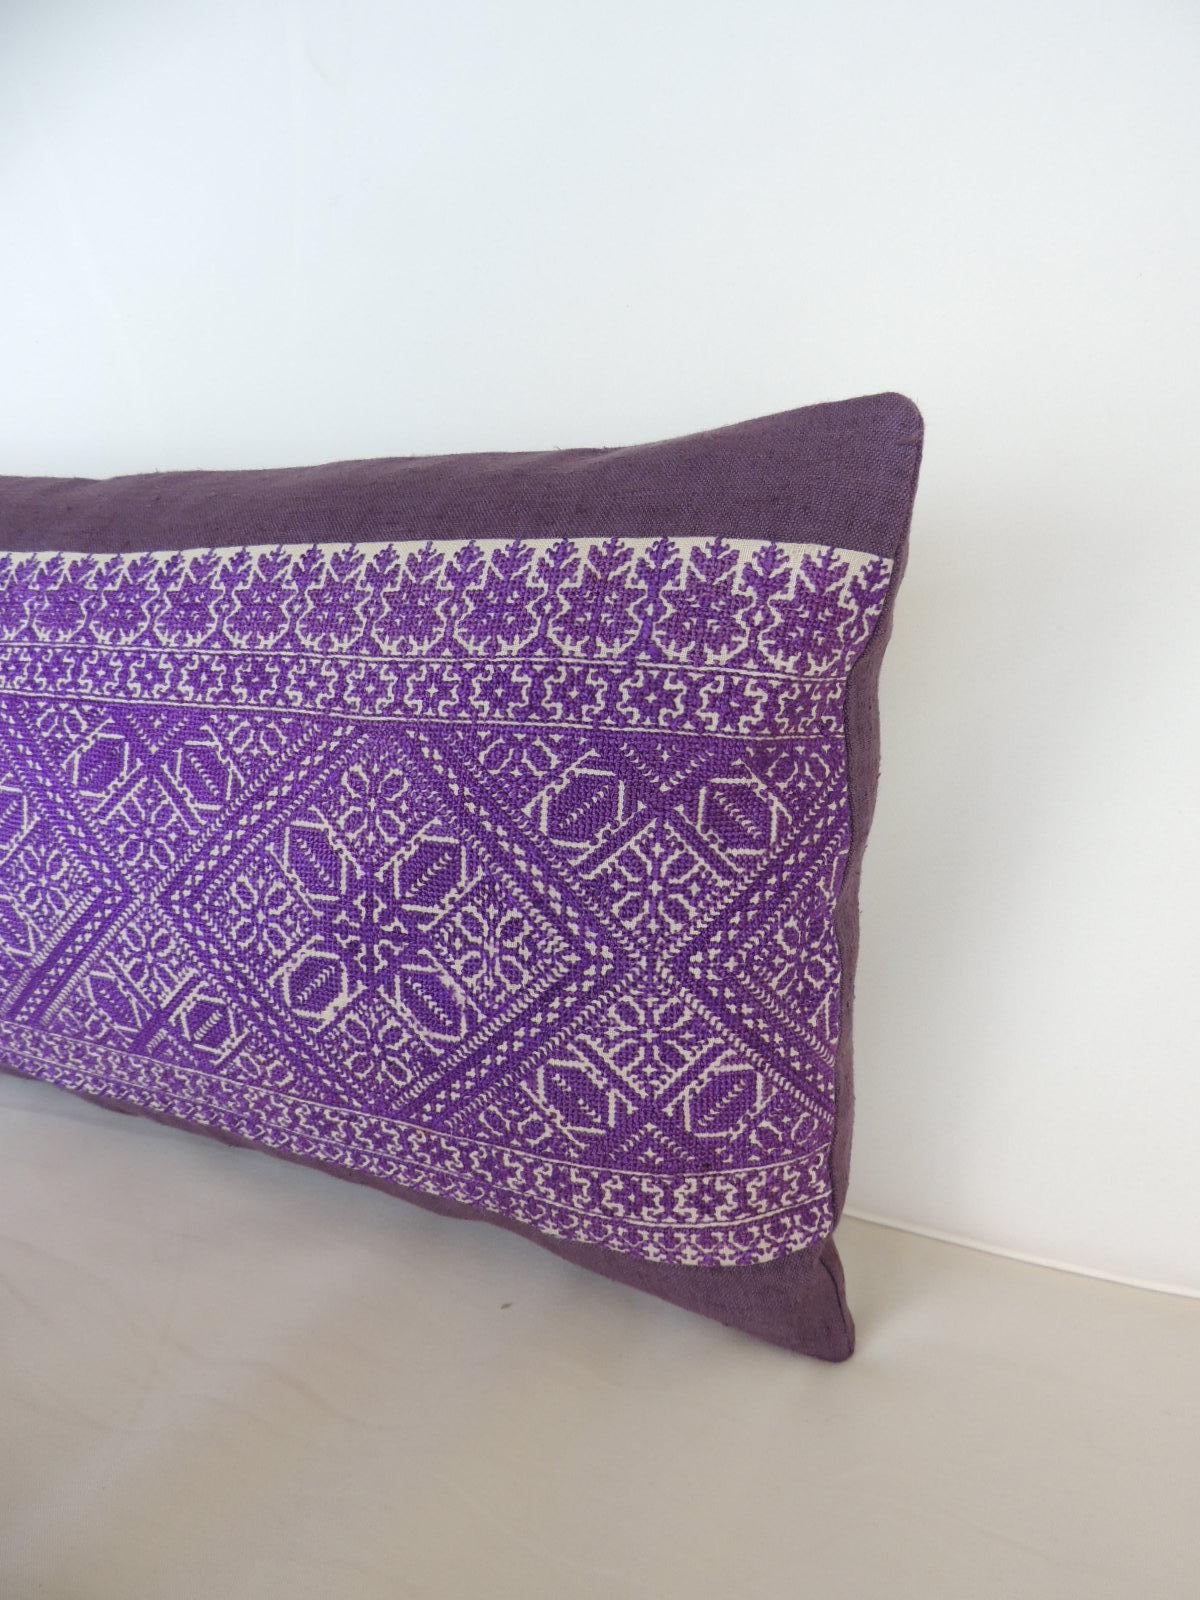 Purple and White Fez Textile Long Decorative Bolster Pillow
Decorative bolster pillow hand-crafted with an artisanal antique textile from the fiber arts traditions of Morocco. The purple Fez embroidery framed in the front center of the bolster